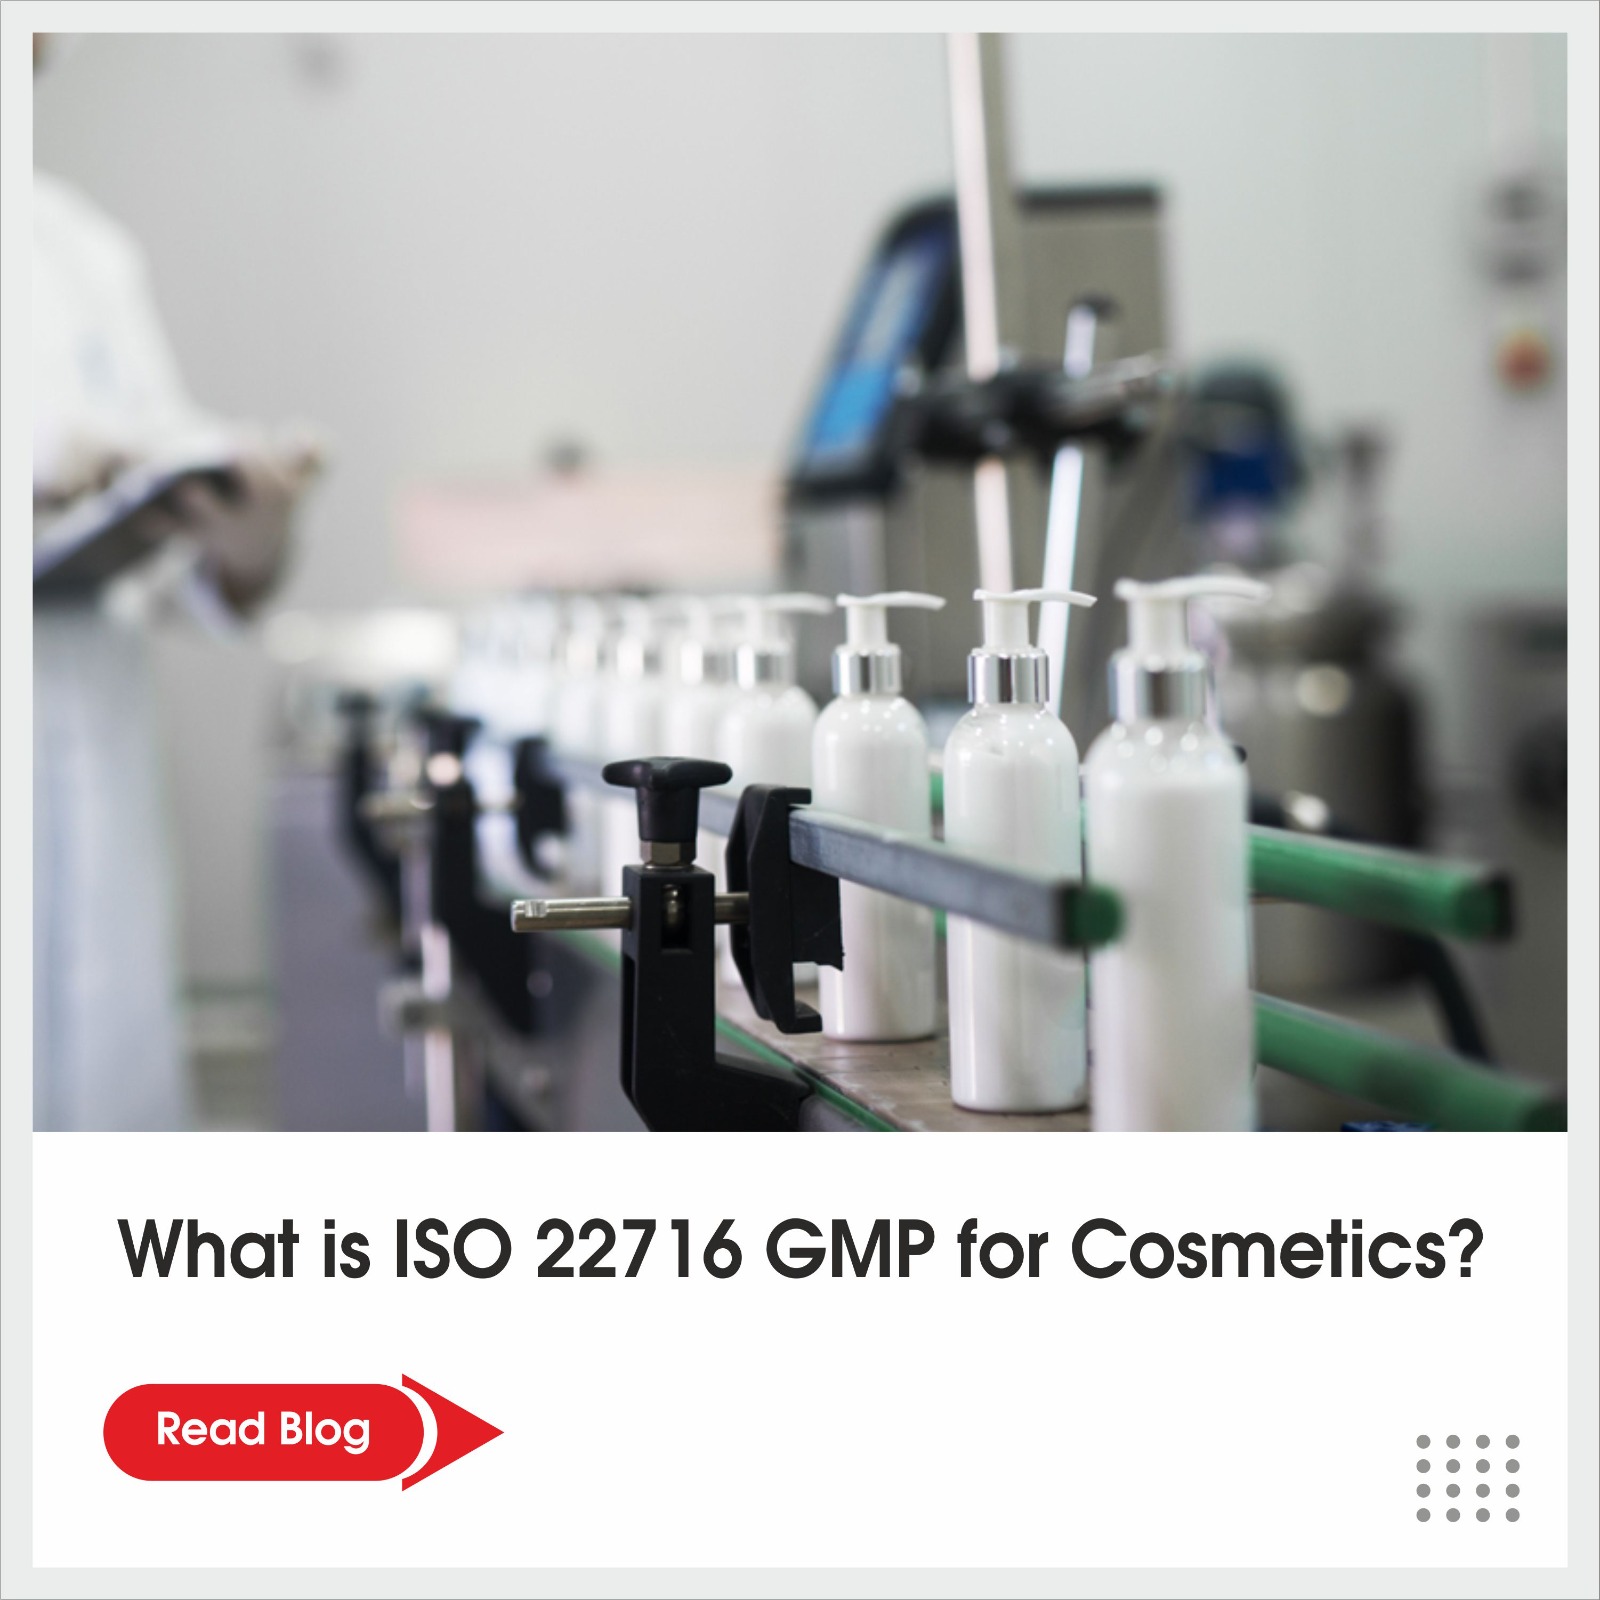 What is ISO 22716 GMP for Cosmetics?